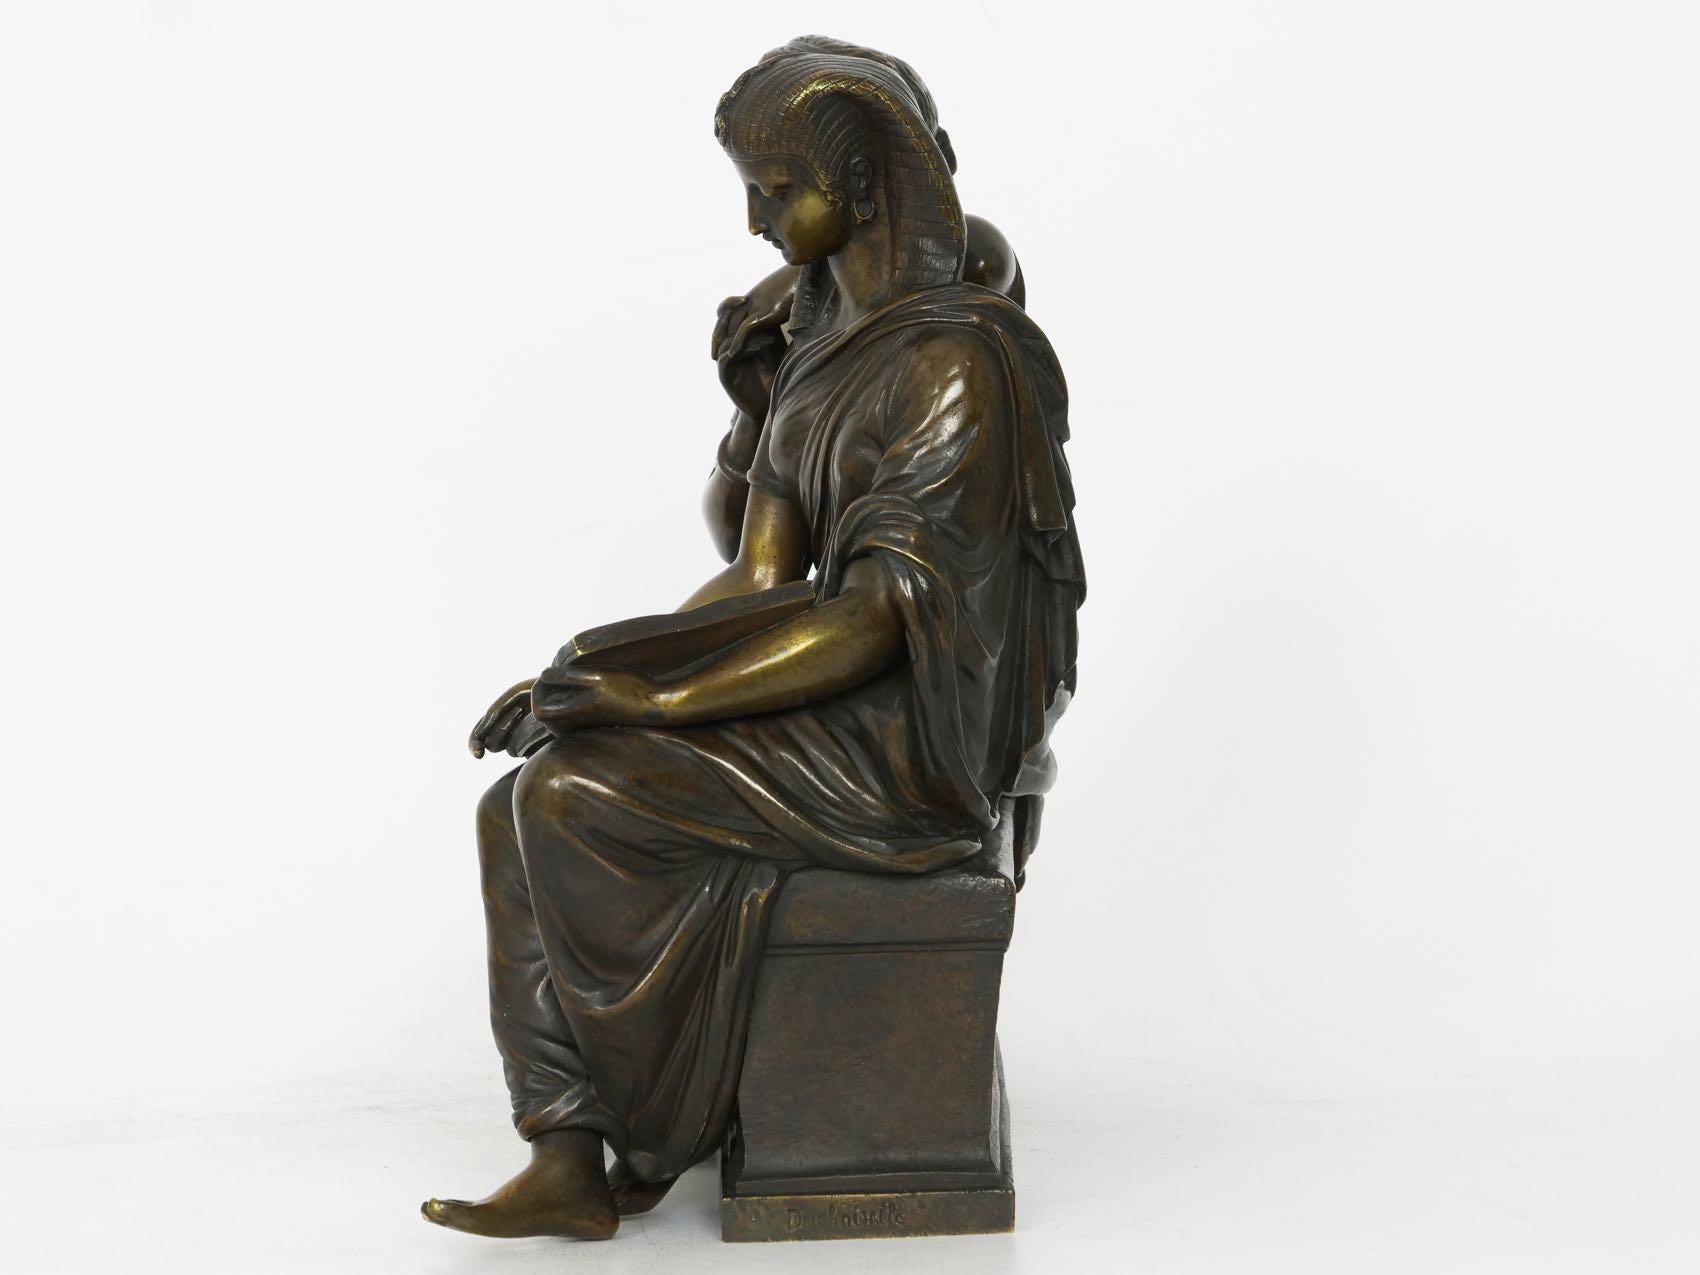 A beautifully cast model by 19th century sculptor Duchoiselle, it is a moving subject that depicts a Babylonian Sibyl passing ancient knowledge on to her Greco-Roman sister in the future. It is an admirable and inspired the handling of a subject